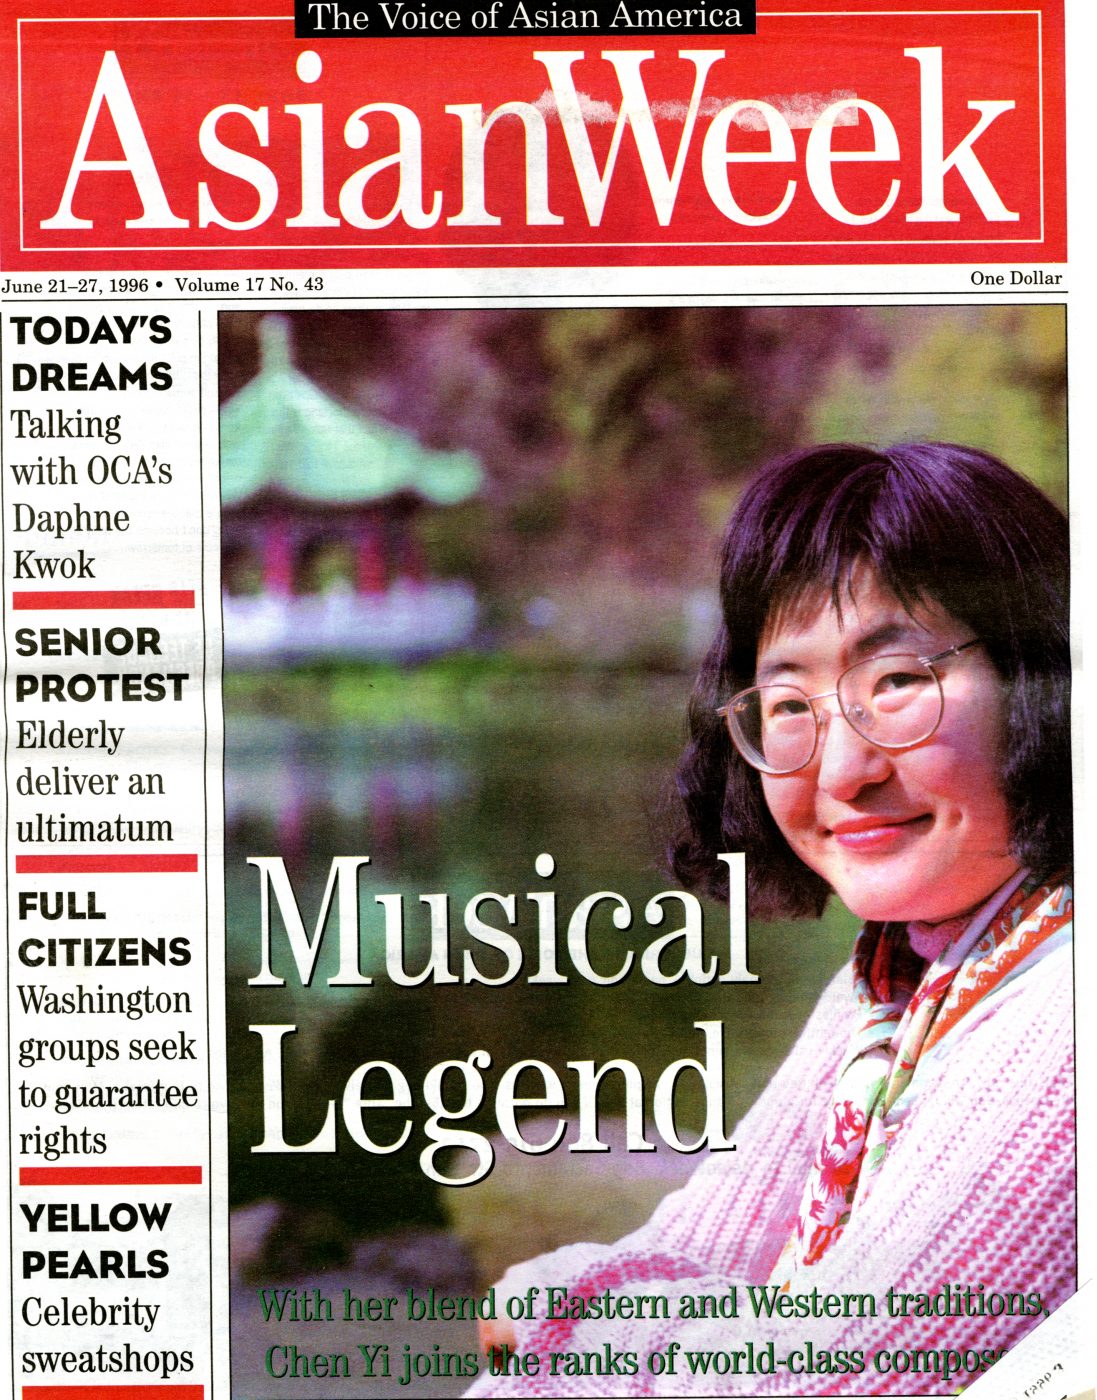 29 May 2019 Posted.
Chen Yi on AsianWeek Cover, 1996, Museum of Chinese in America (MOCA) Collection.
陈怡登上1996年AsianWeek杂志封面，美国华人博物馆（MOCA）馆藏